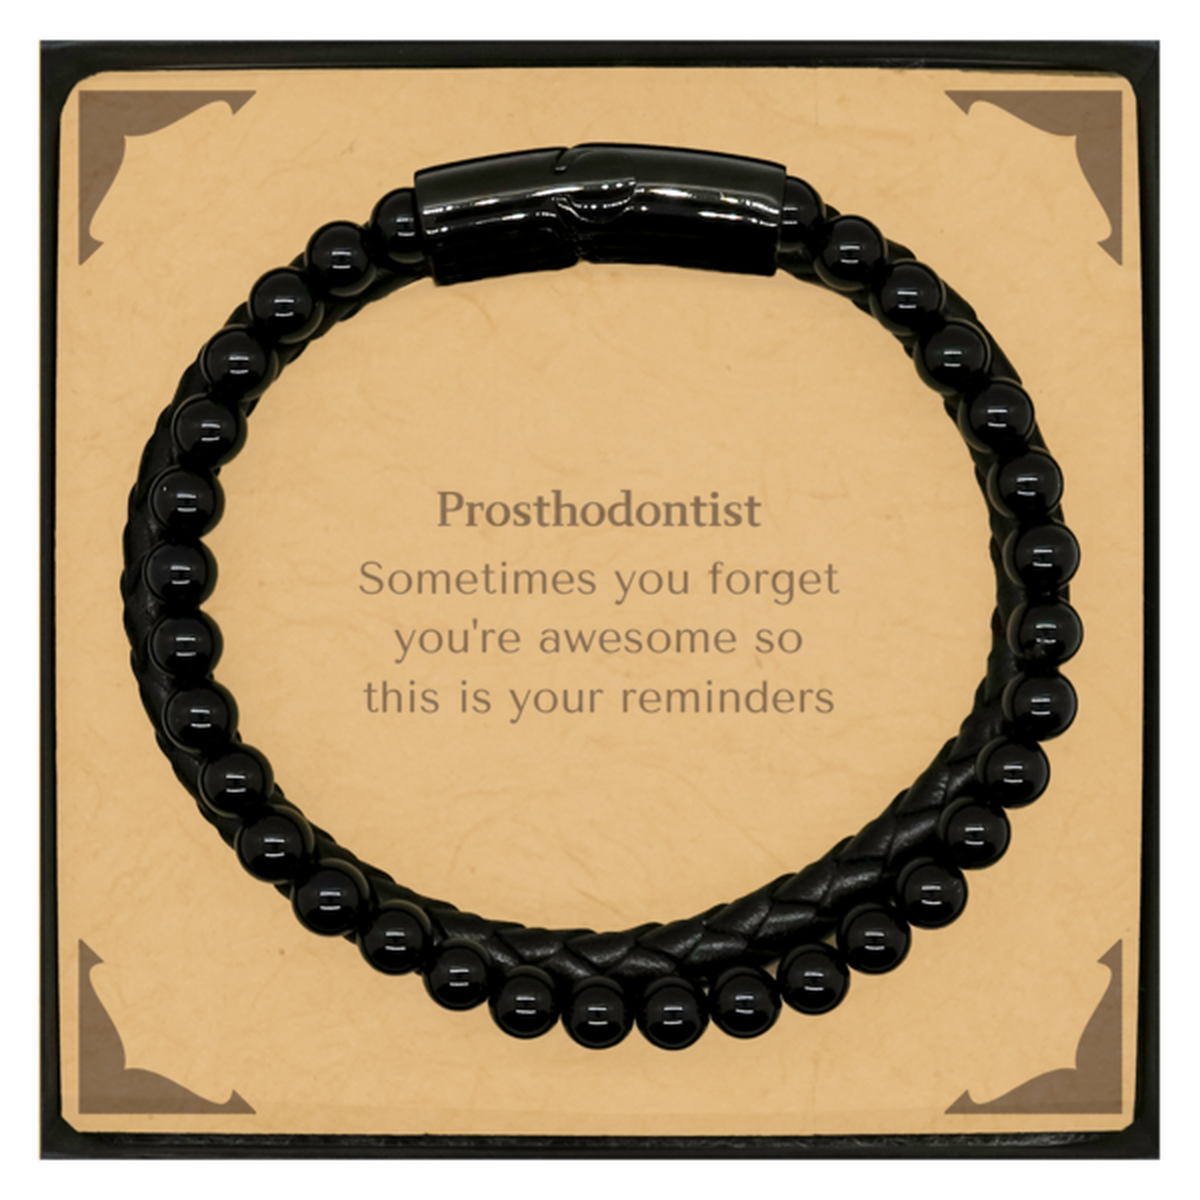 Sentimental Prosthodontist Stone Leather Bracelets, Prosthodontist Sometimes you forget you're awesome so this is your reminders, Graduation Christmas Birthday Gifts for Prosthodontist, Men, Women, Coworkers